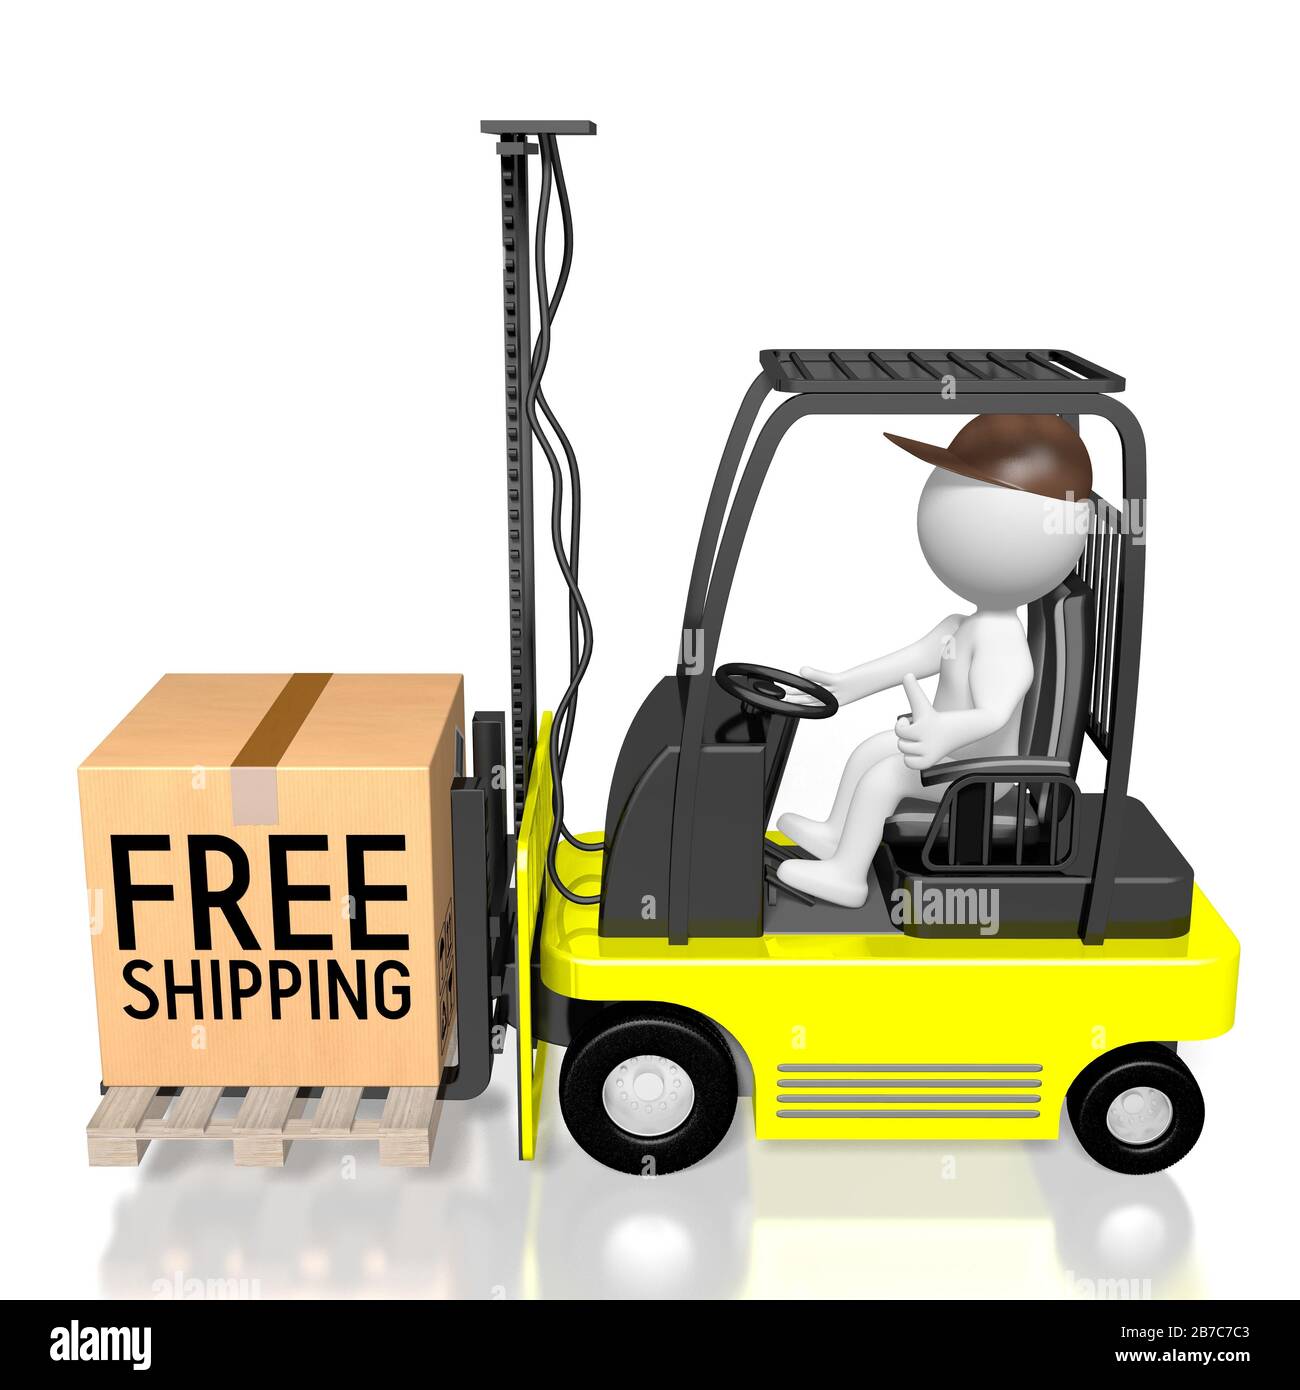 Forklift vehicle, free shippin concept - 3D rendering Stock Photo